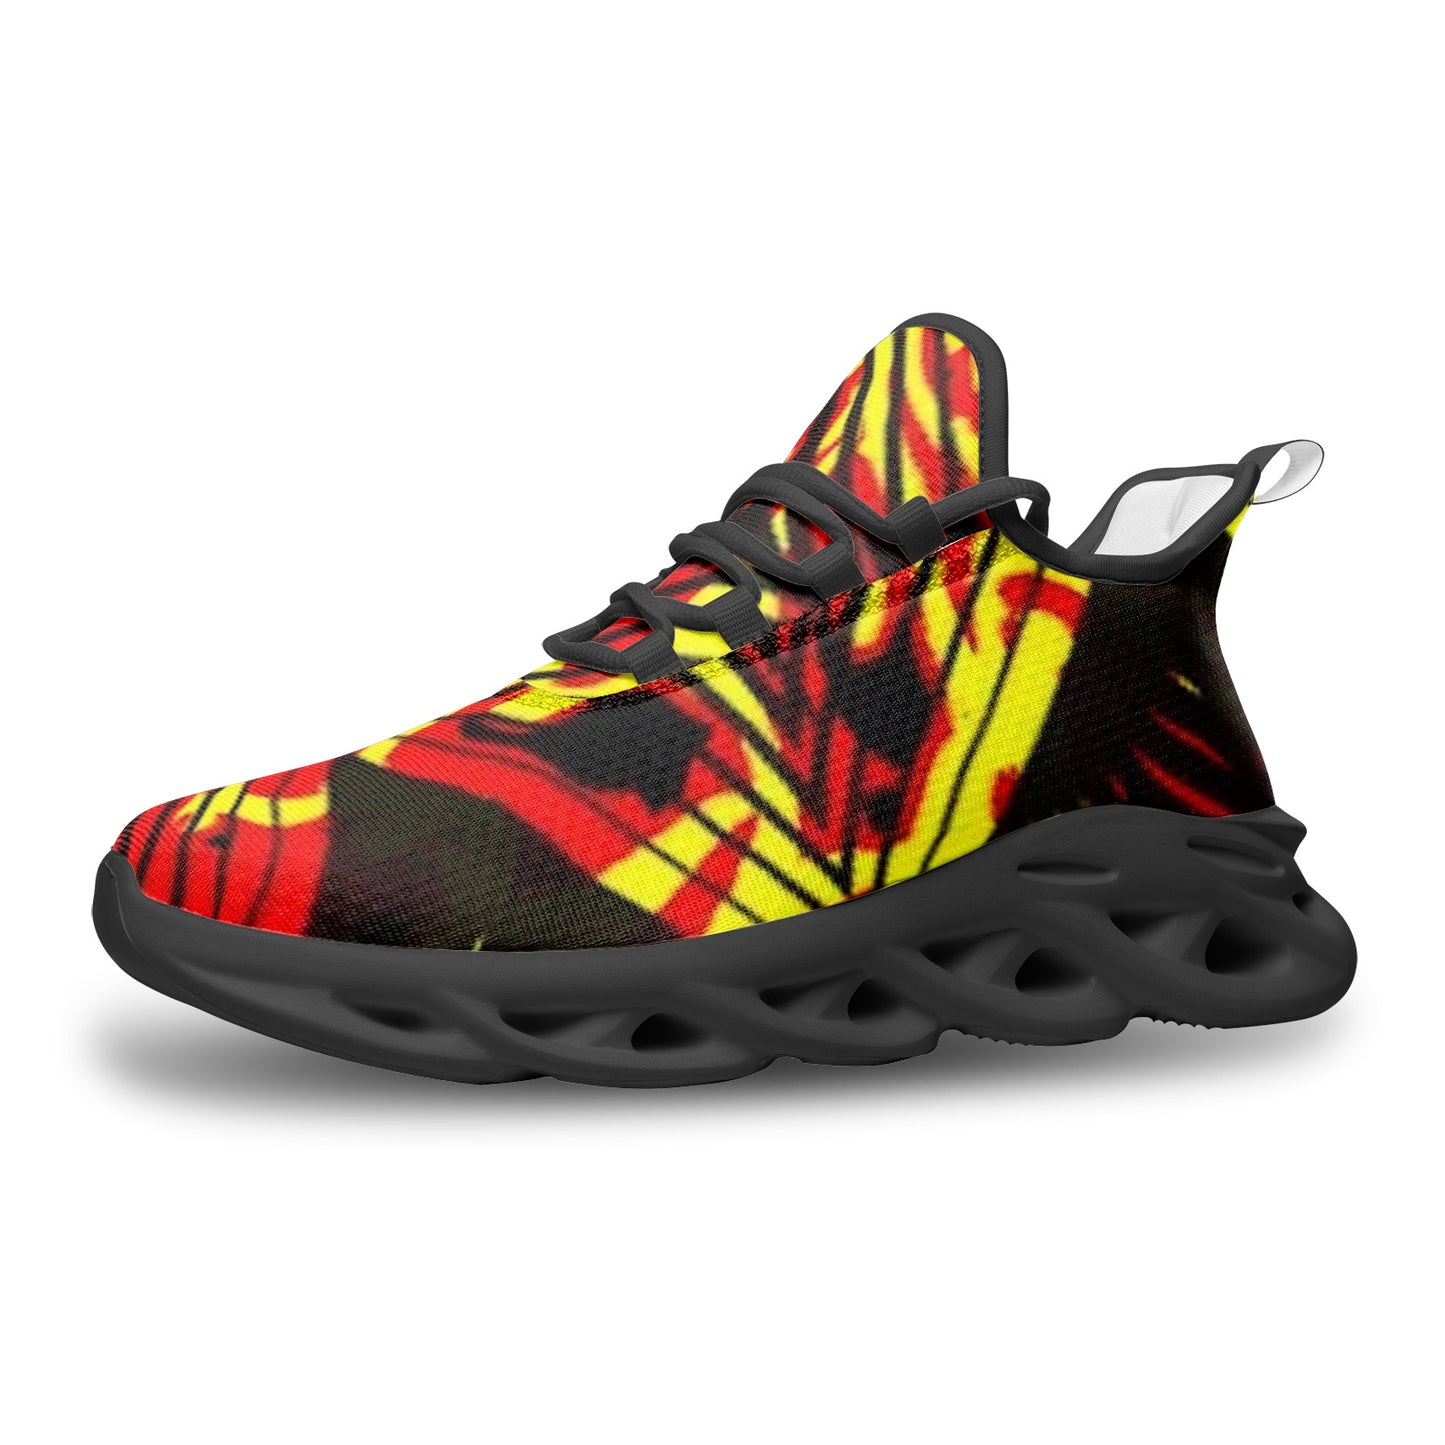 FZ African Print Unisex Bounce Mesh Knit Sneakers